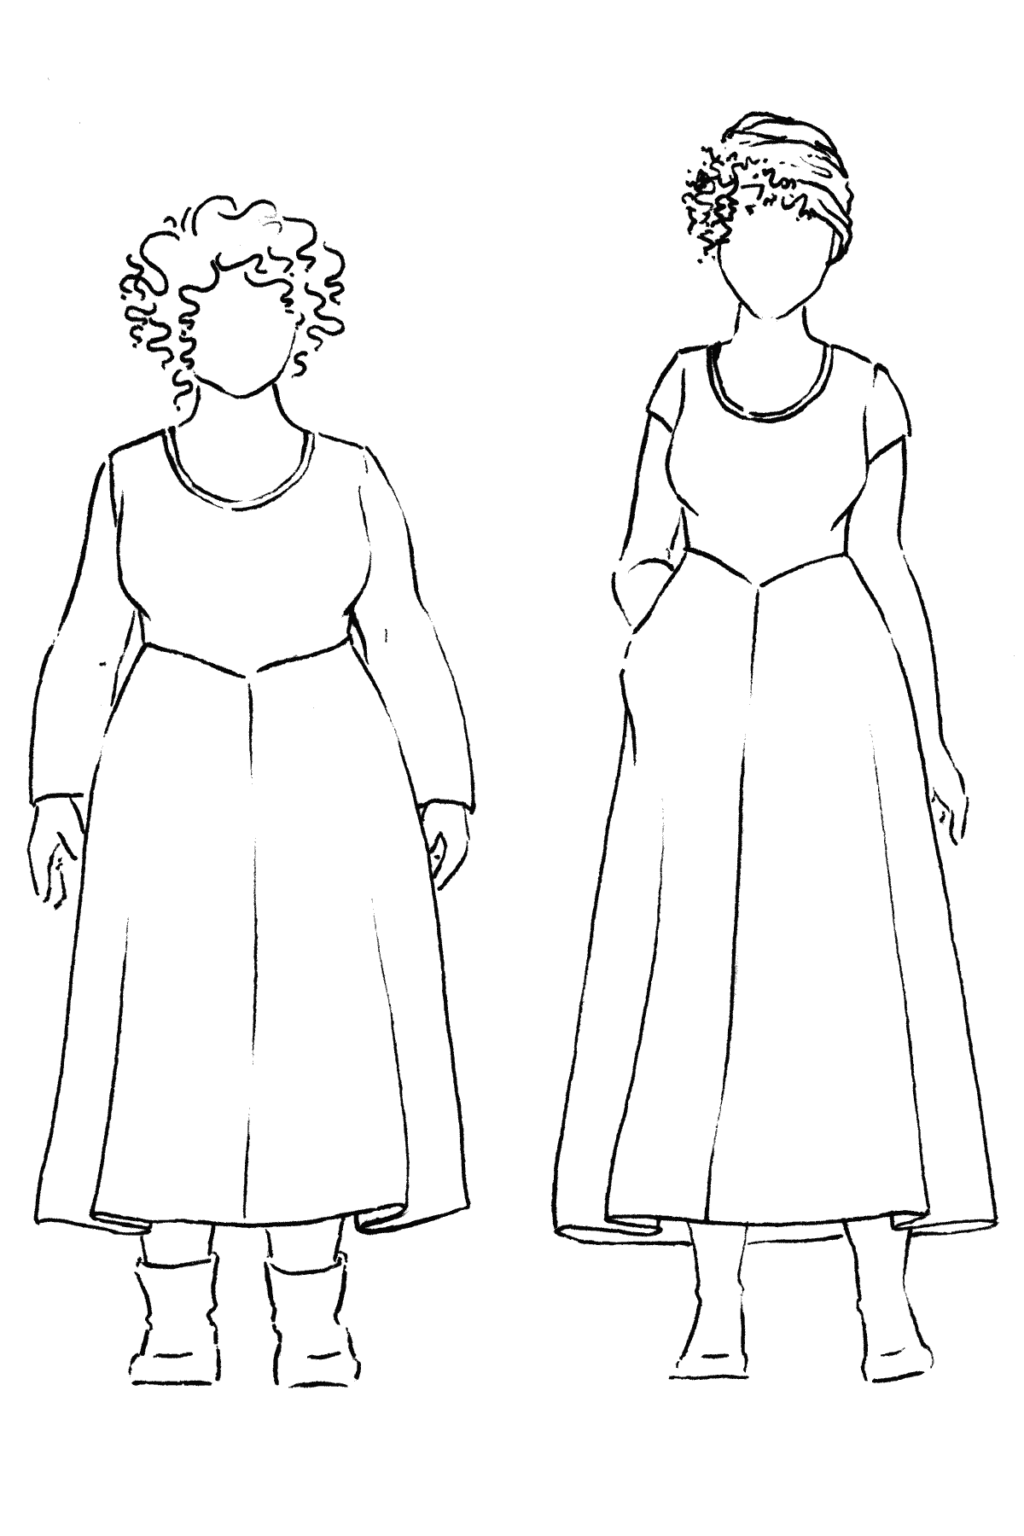 Croquis drawings of the Stasia Dress